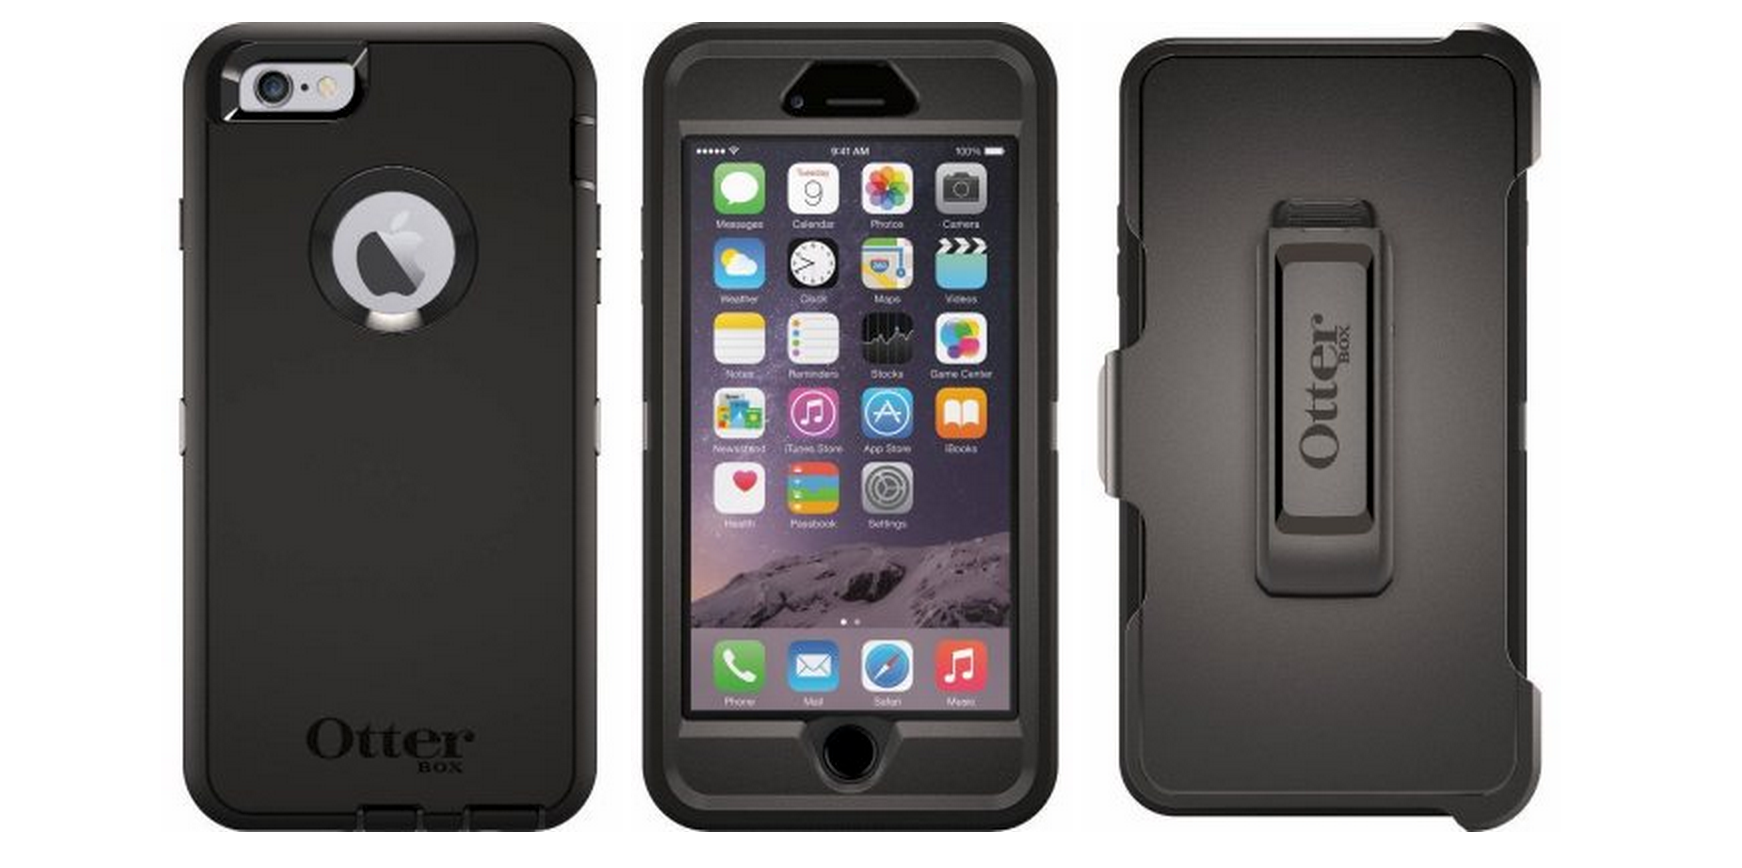 OtterBox iPhone 6/Plus Defender Series case in black from $25 shipped